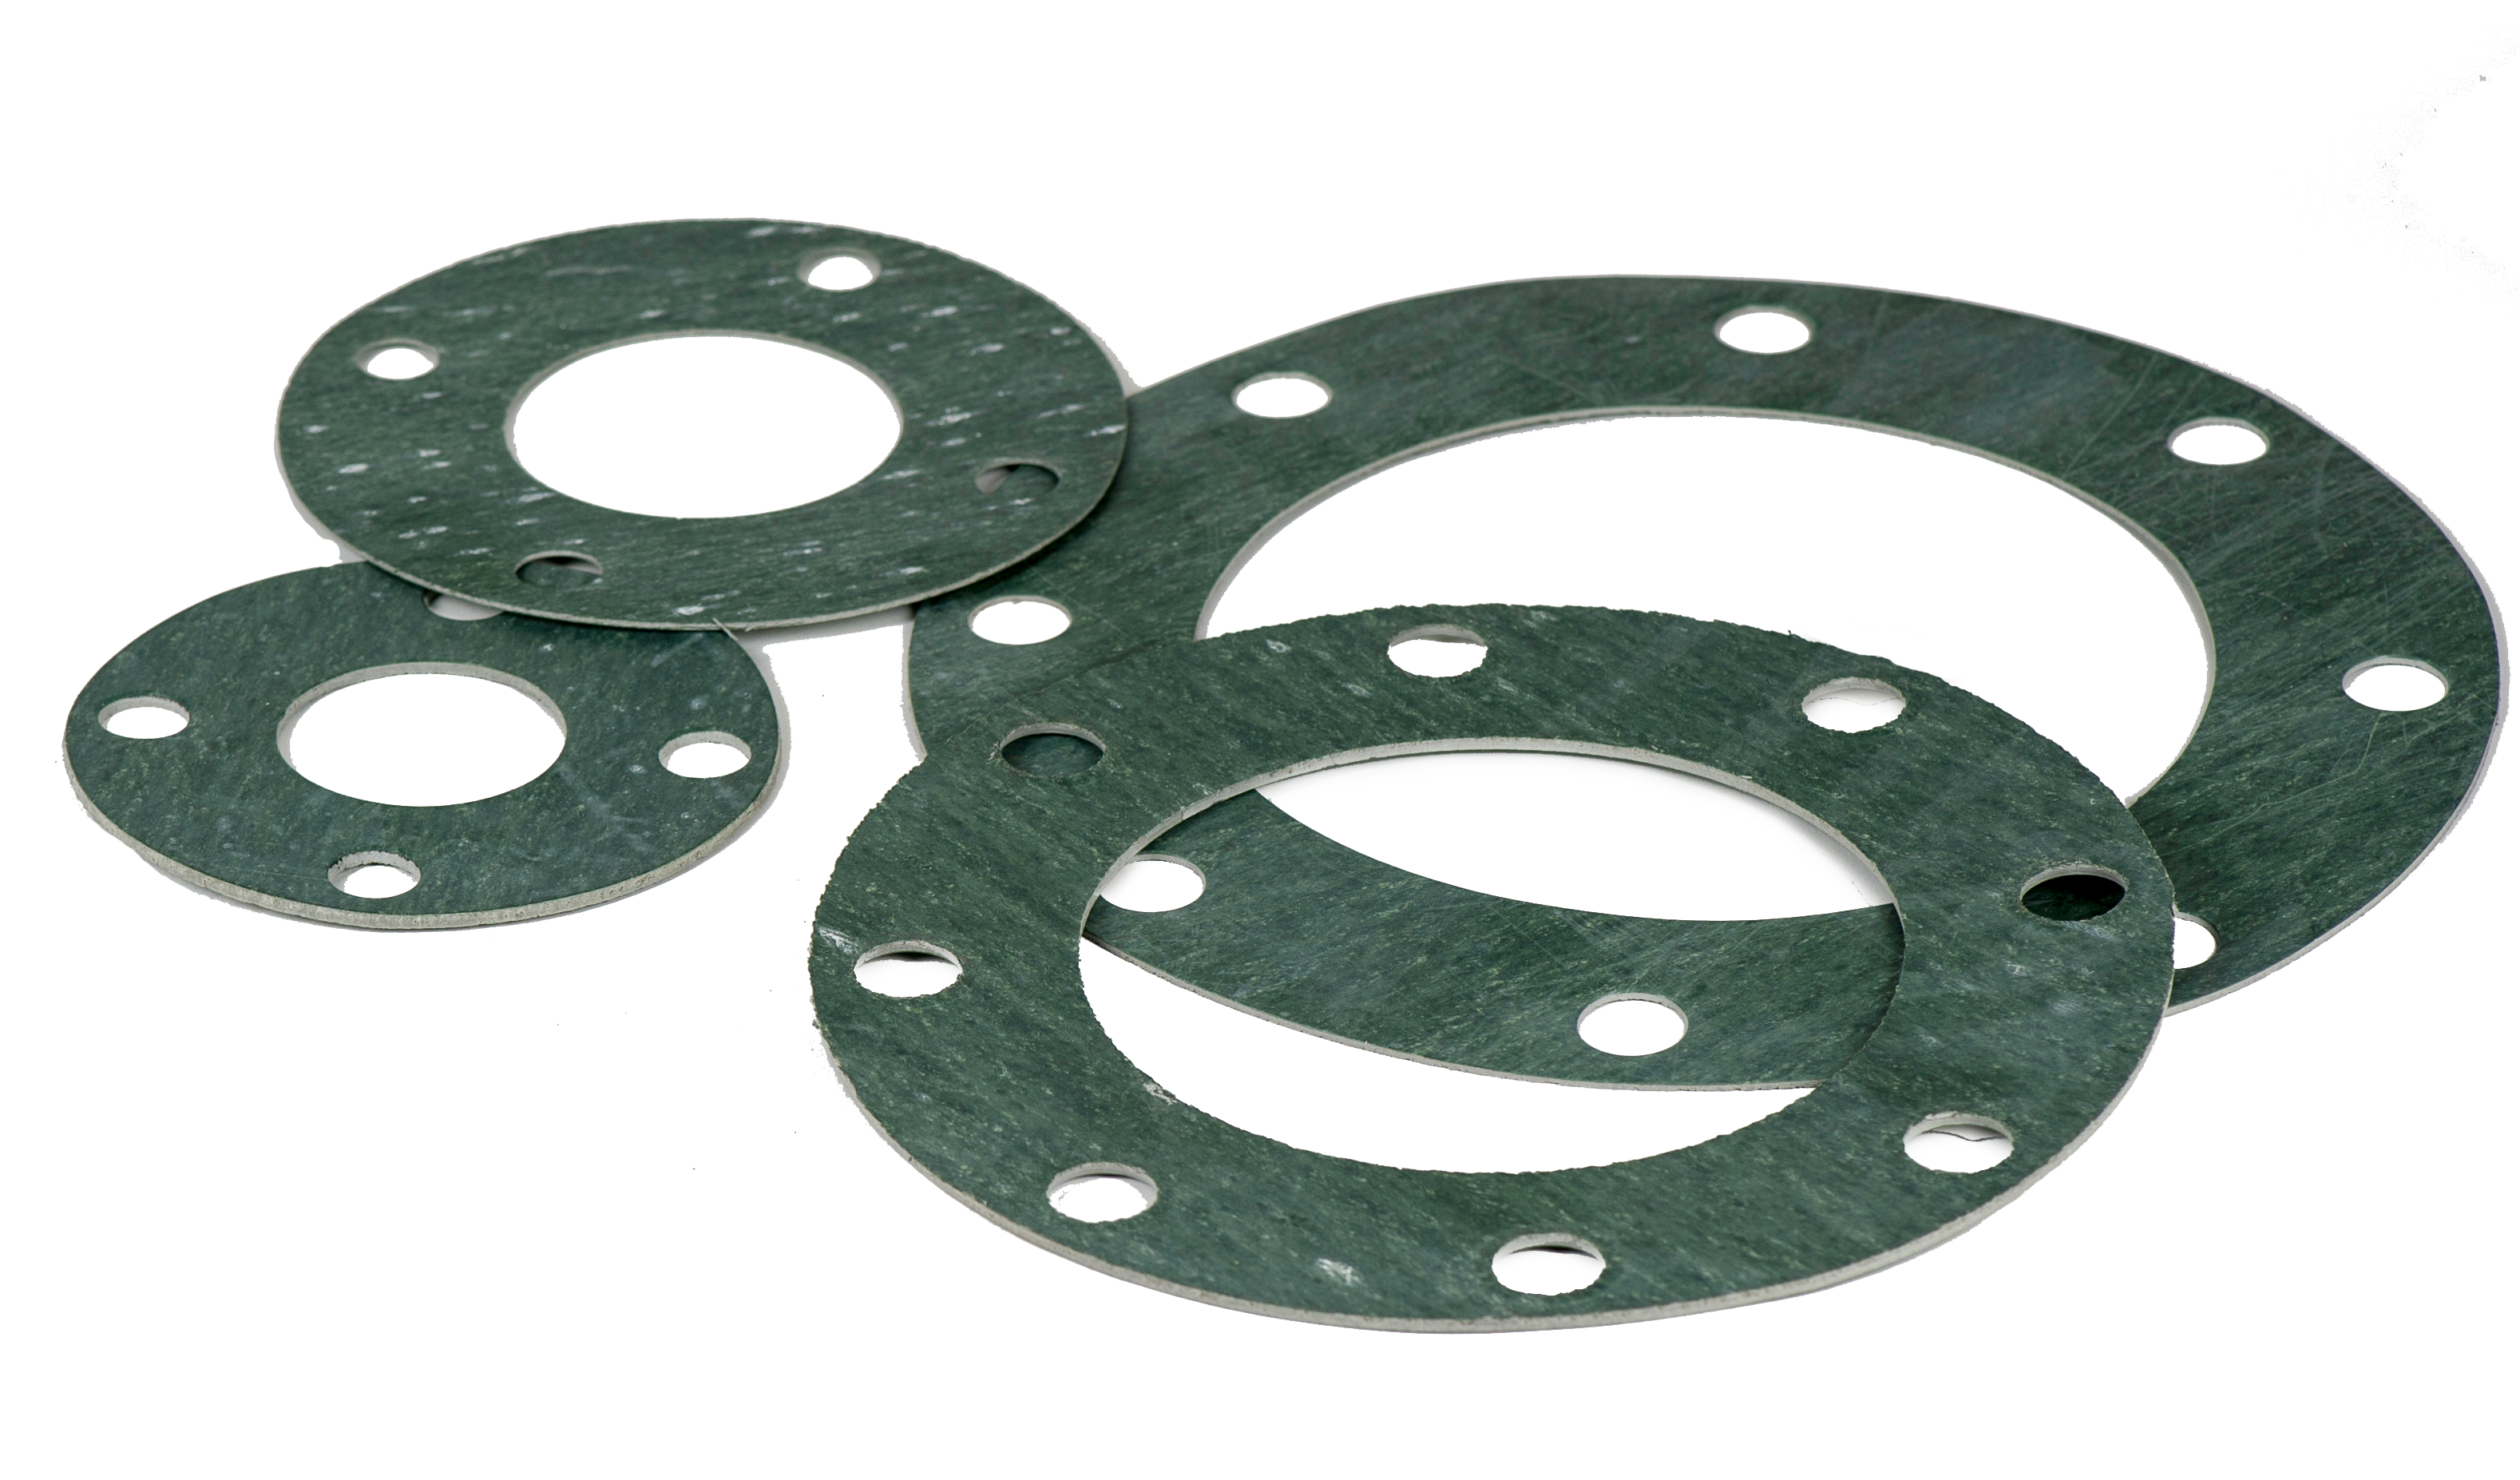 Class 150 Full Face Flexible Graphite Flange Gasket for 2-1/2 Pipe-1/16 Thick 